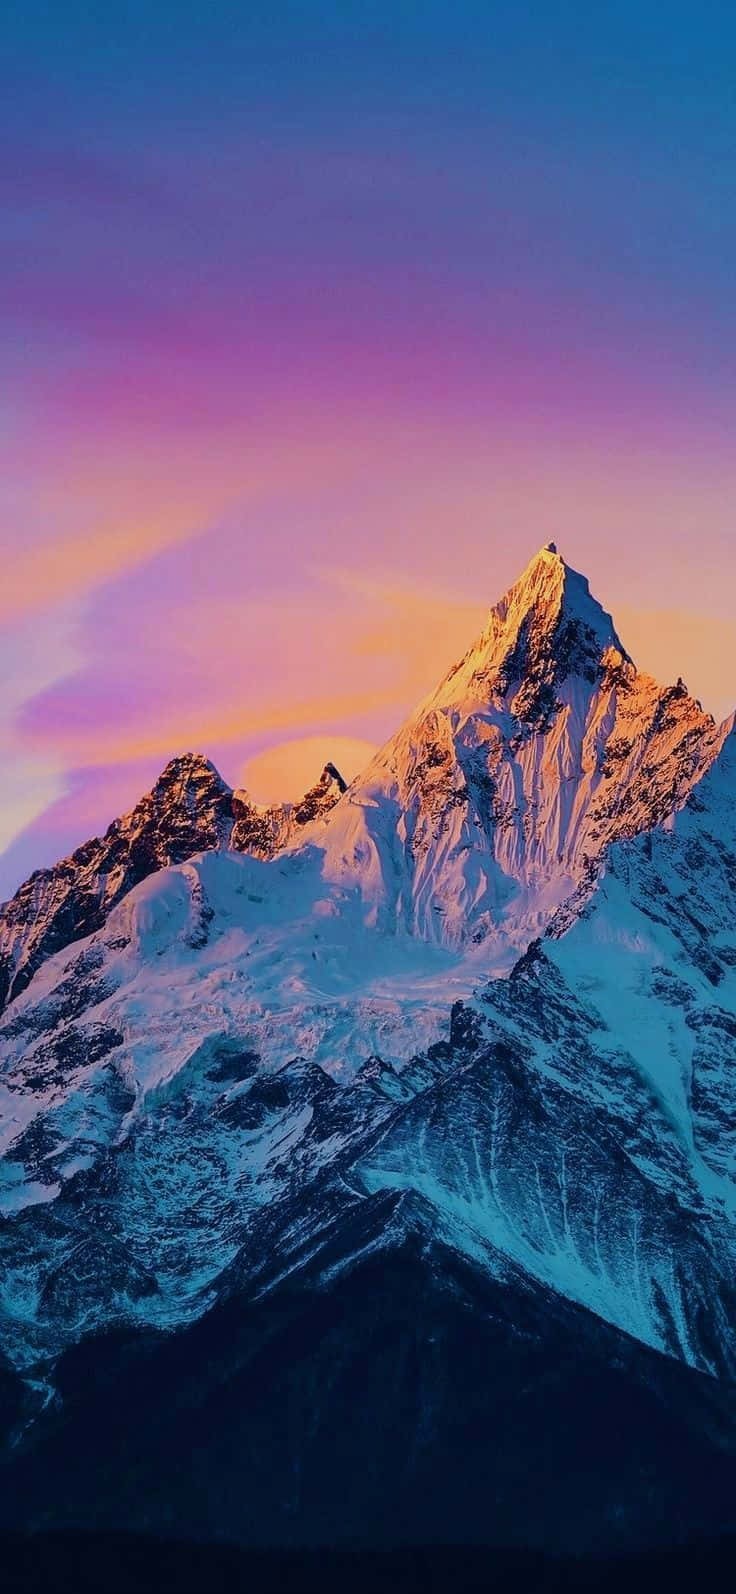 1400+] Mountains Wallpapers | Wallpapers.com